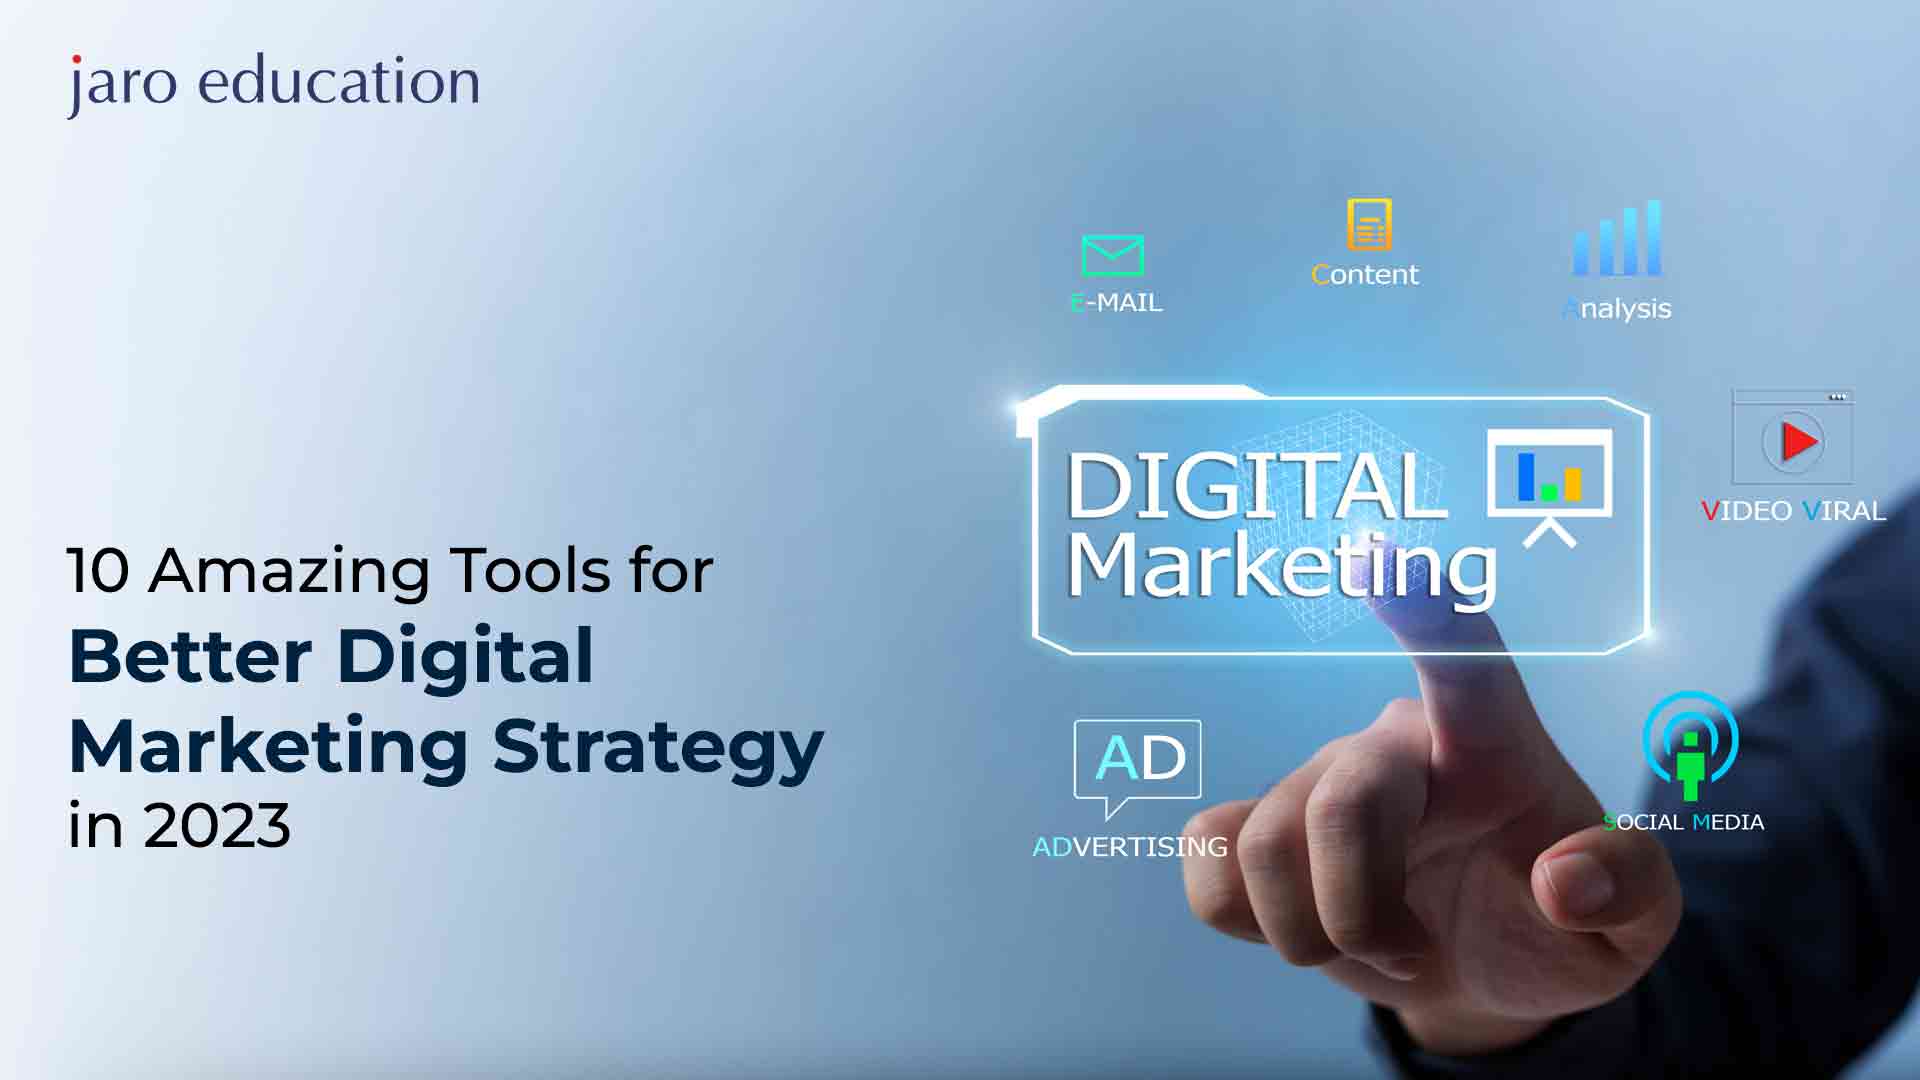 10-Amazing-Tools-for-Better-Digital-Marketing-Strategy-in-2023 jaro